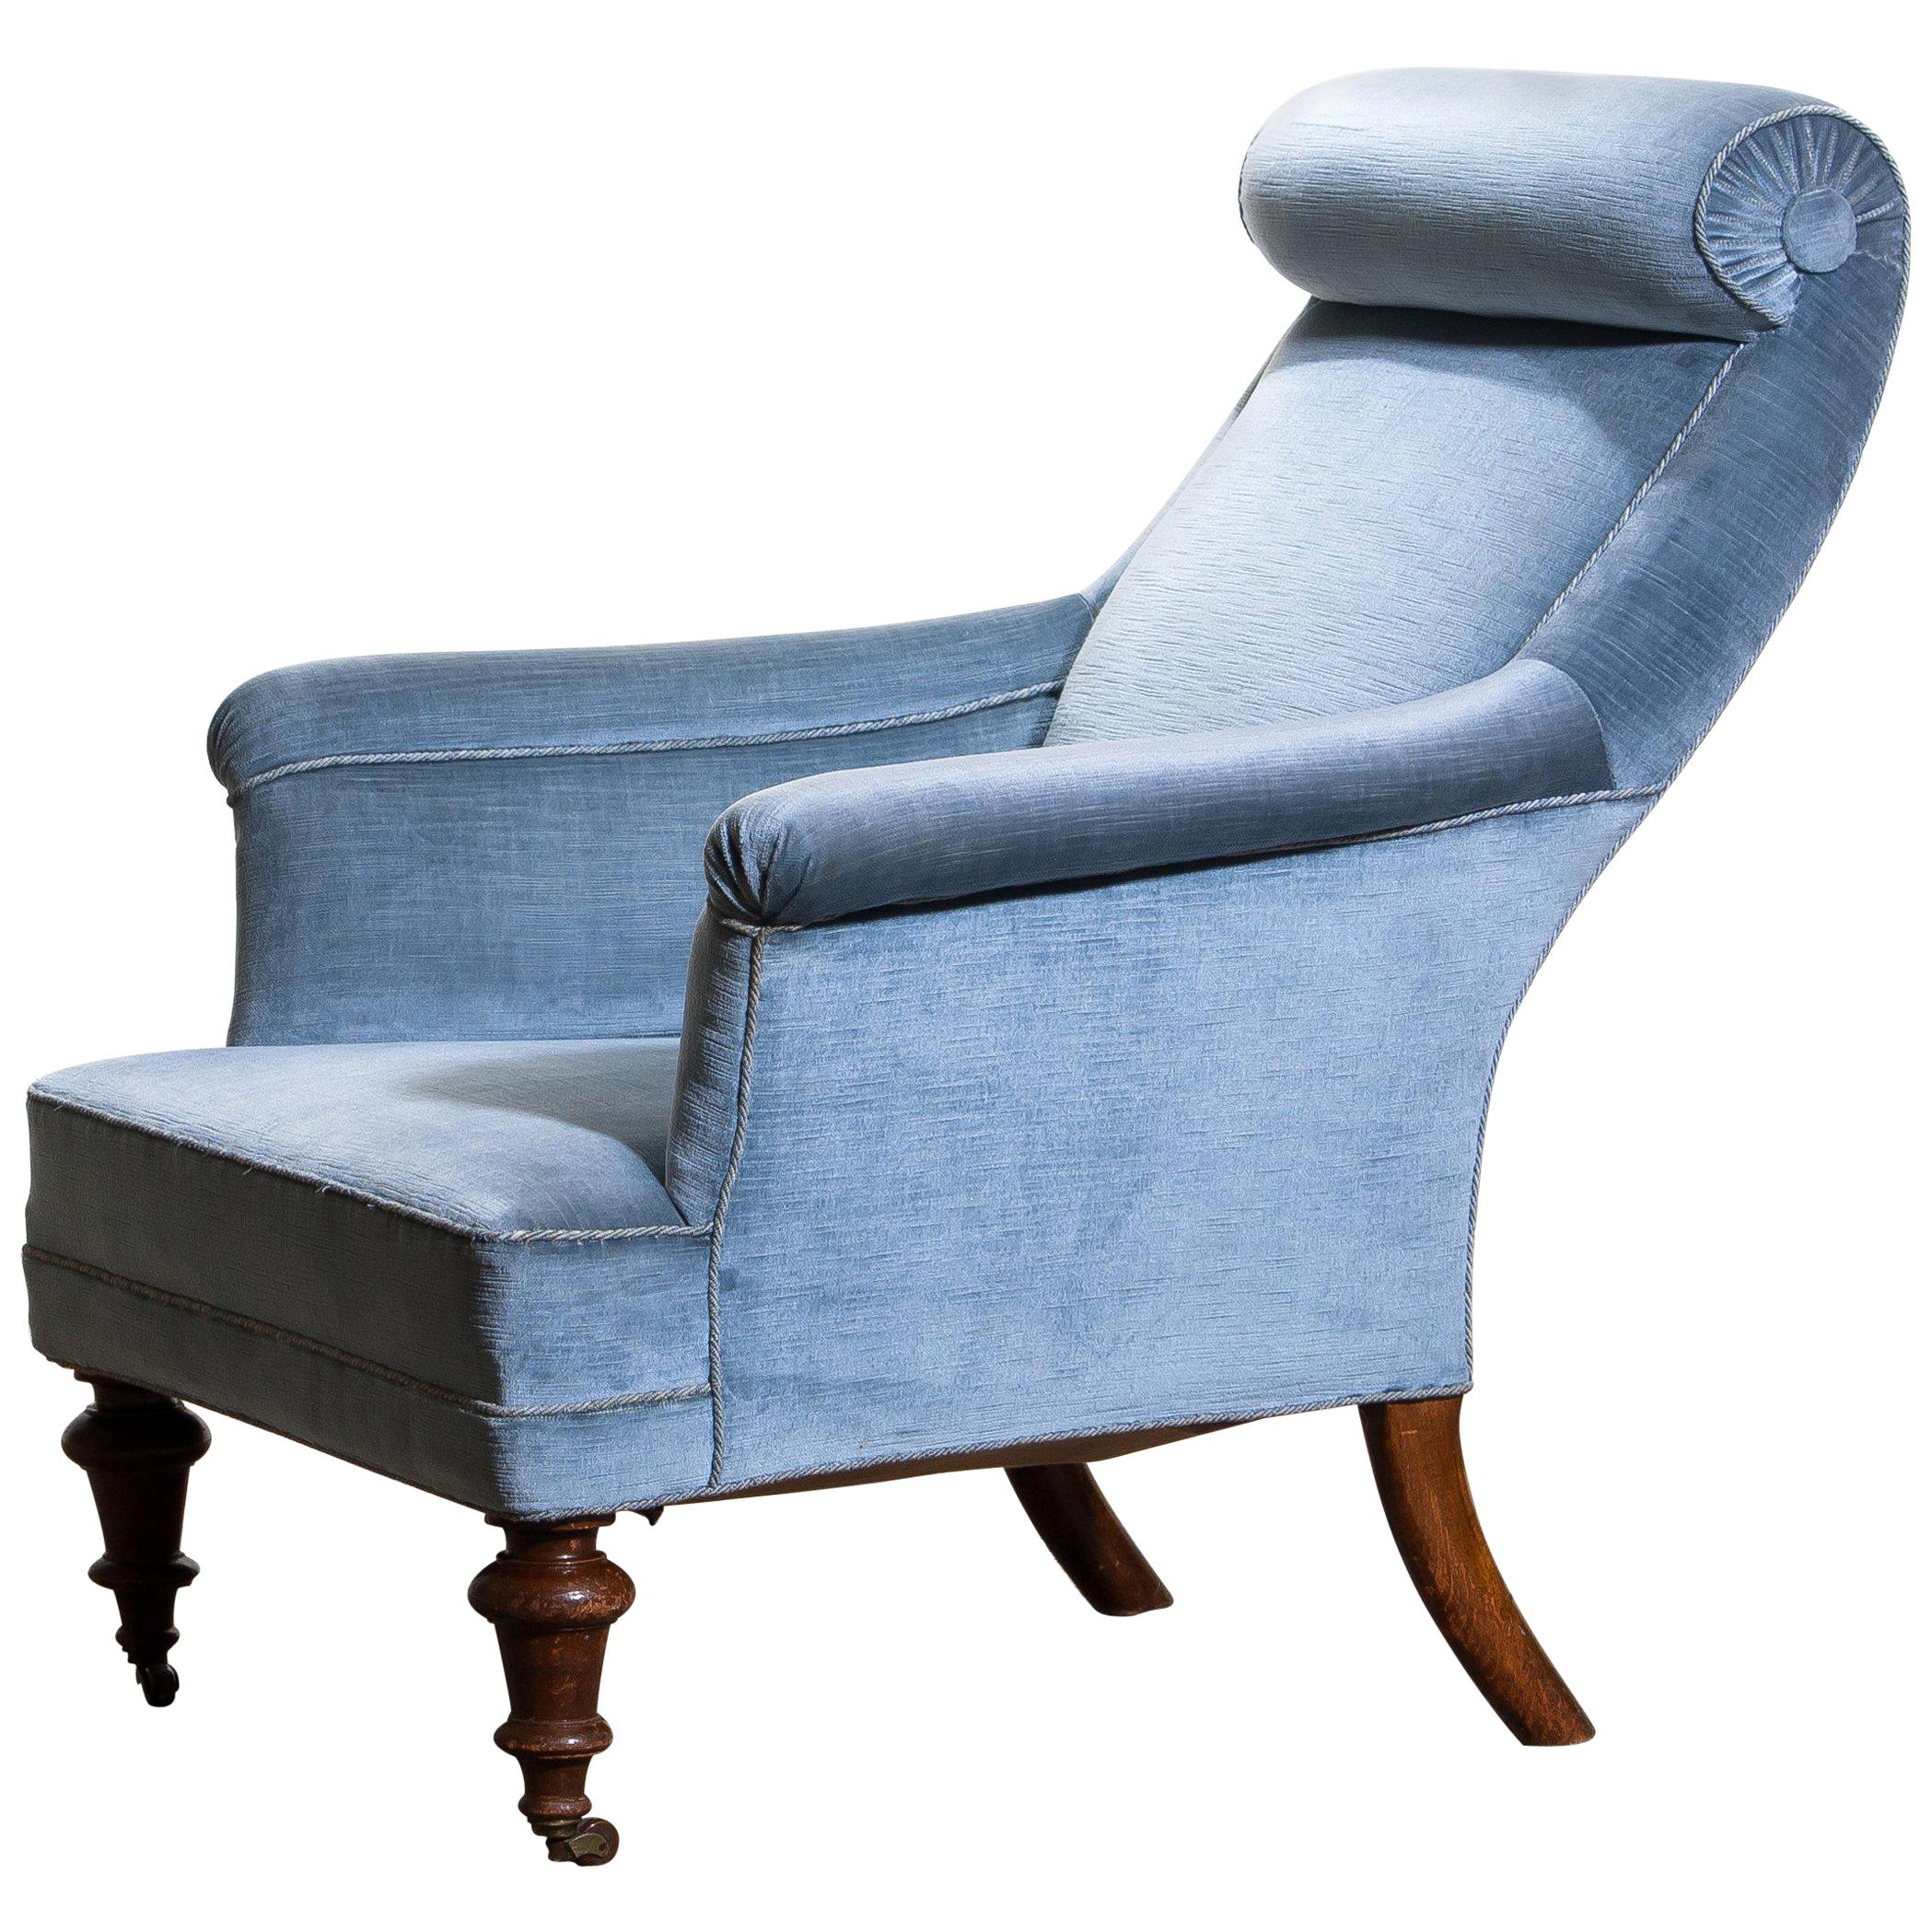 Rare and extremely comfortable / beautiful bergère / lounge chair in Dorothy draper style from the turn to the 20th century.
Upholstered in ice blue velvet and in good condition.

Period: 1900.